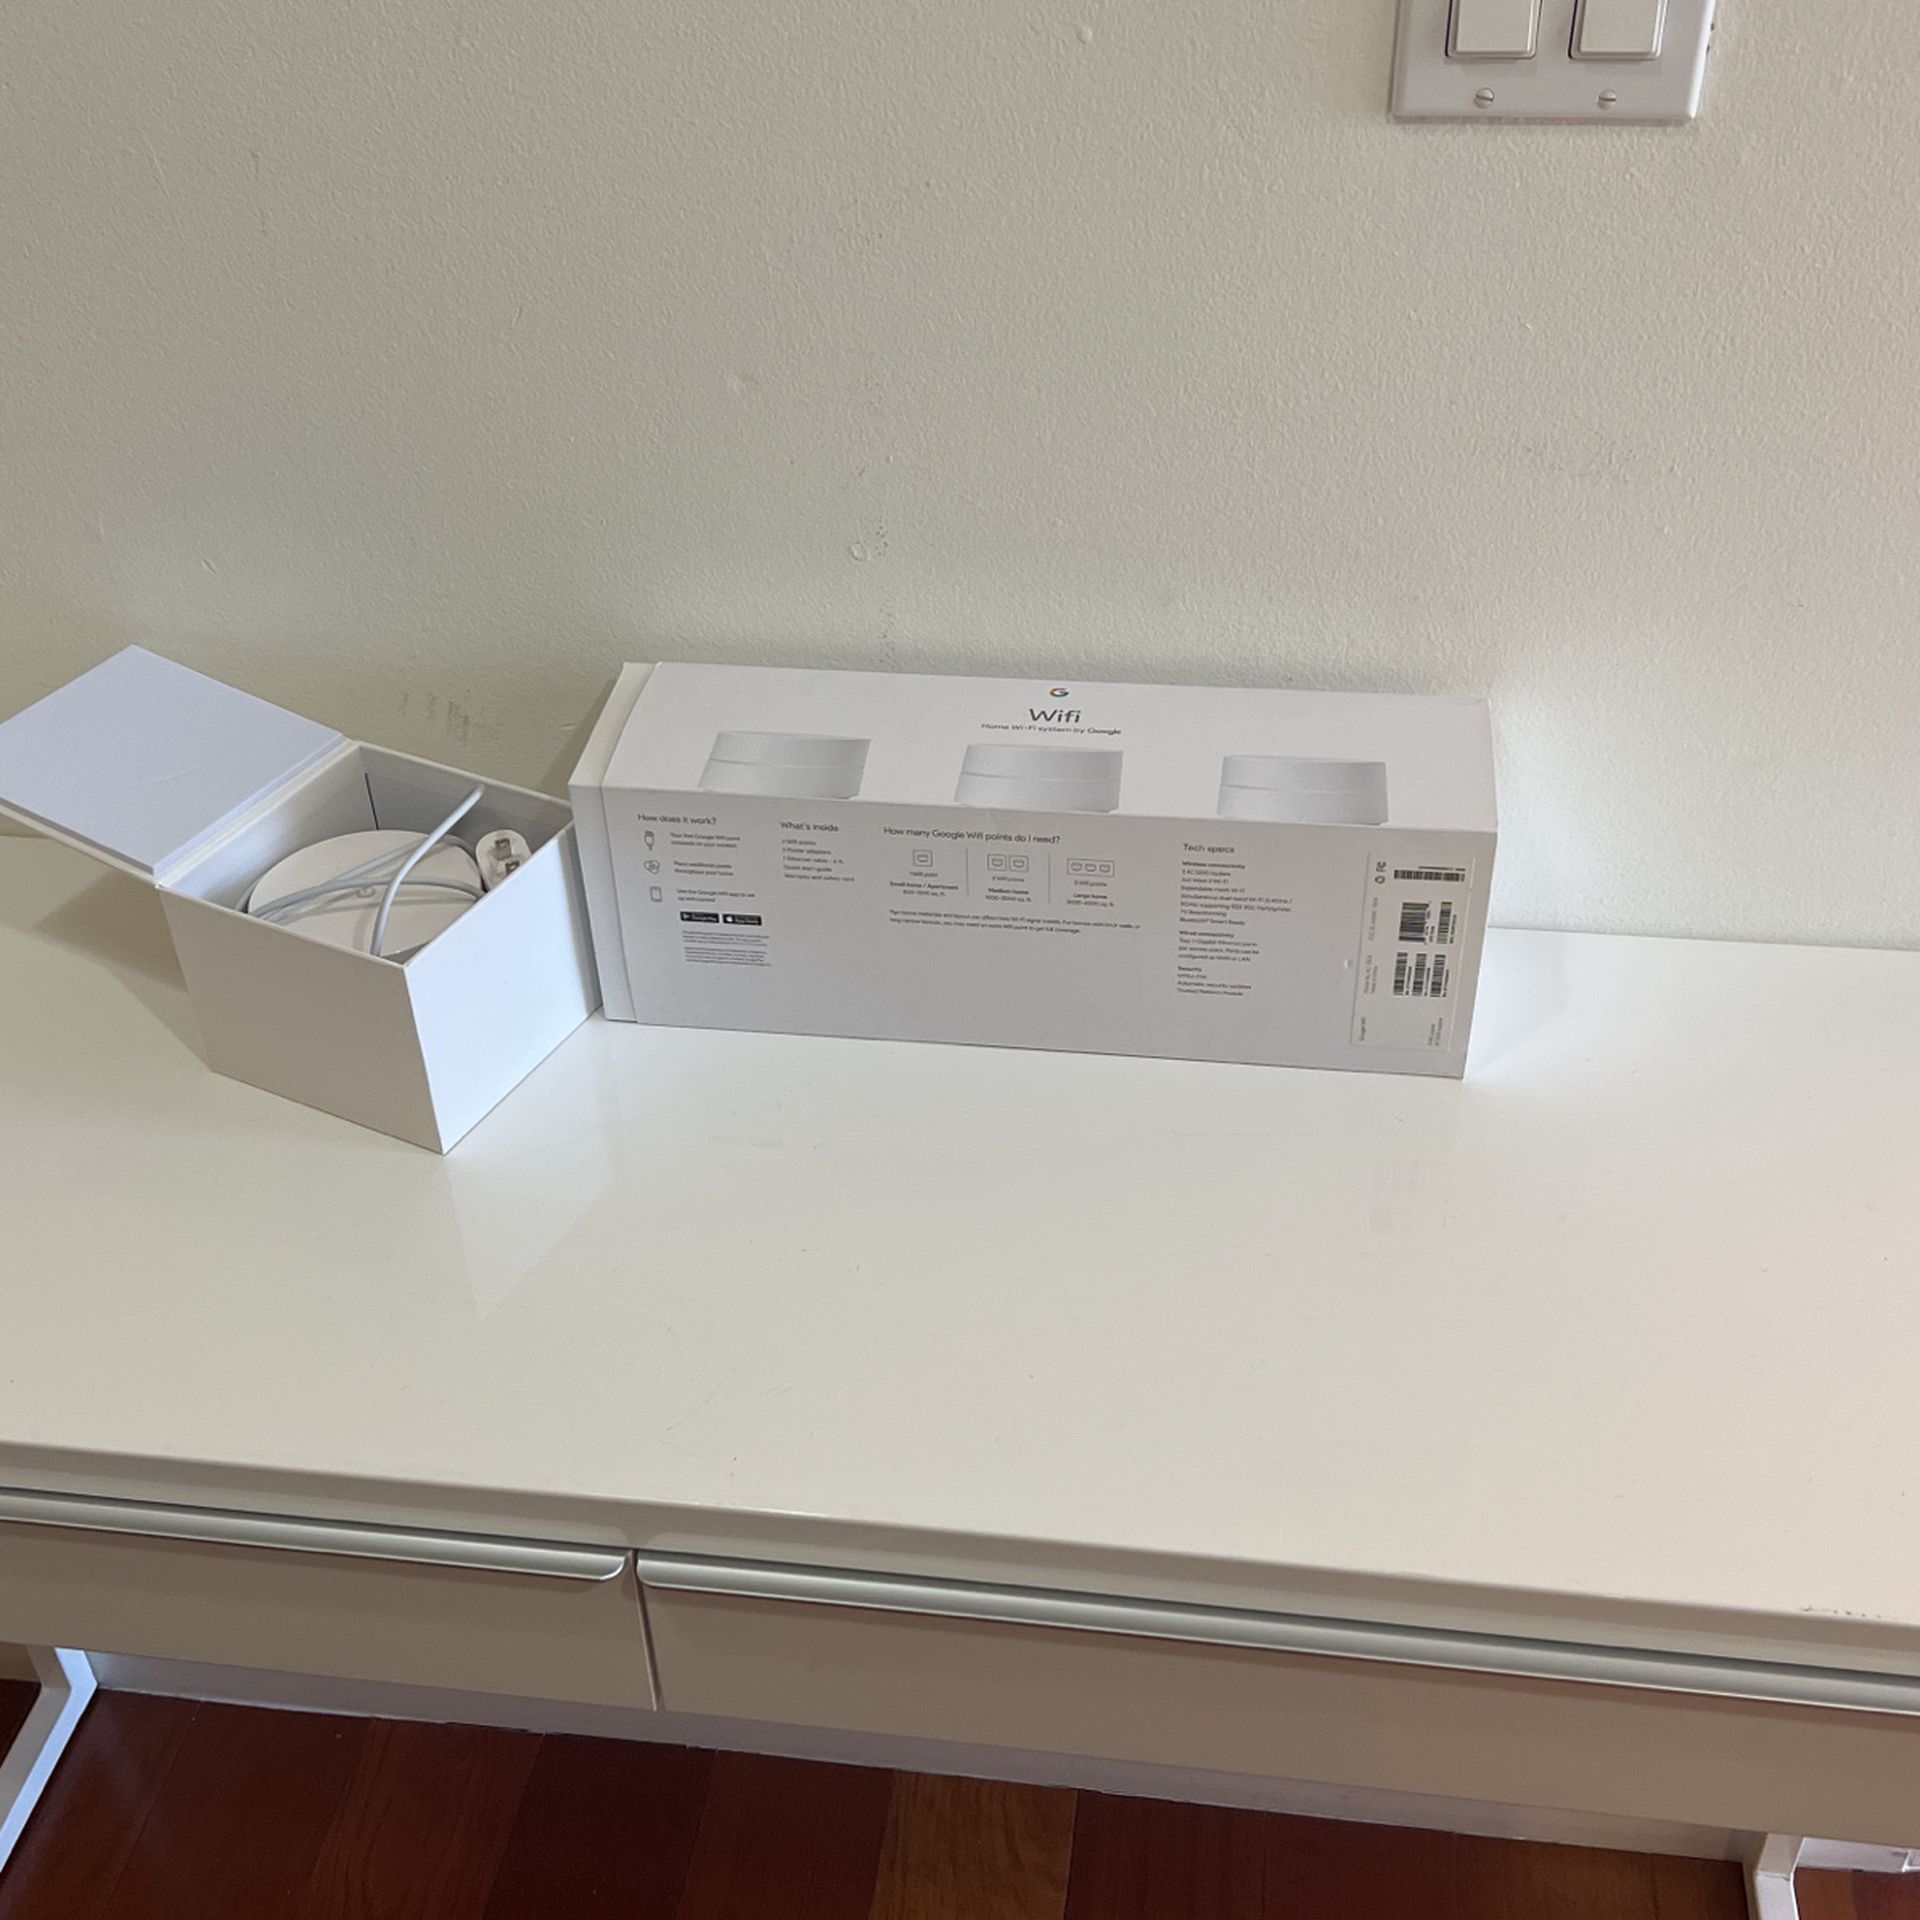 Google Mesh WiFi Router And 4 Access Points - AC1200